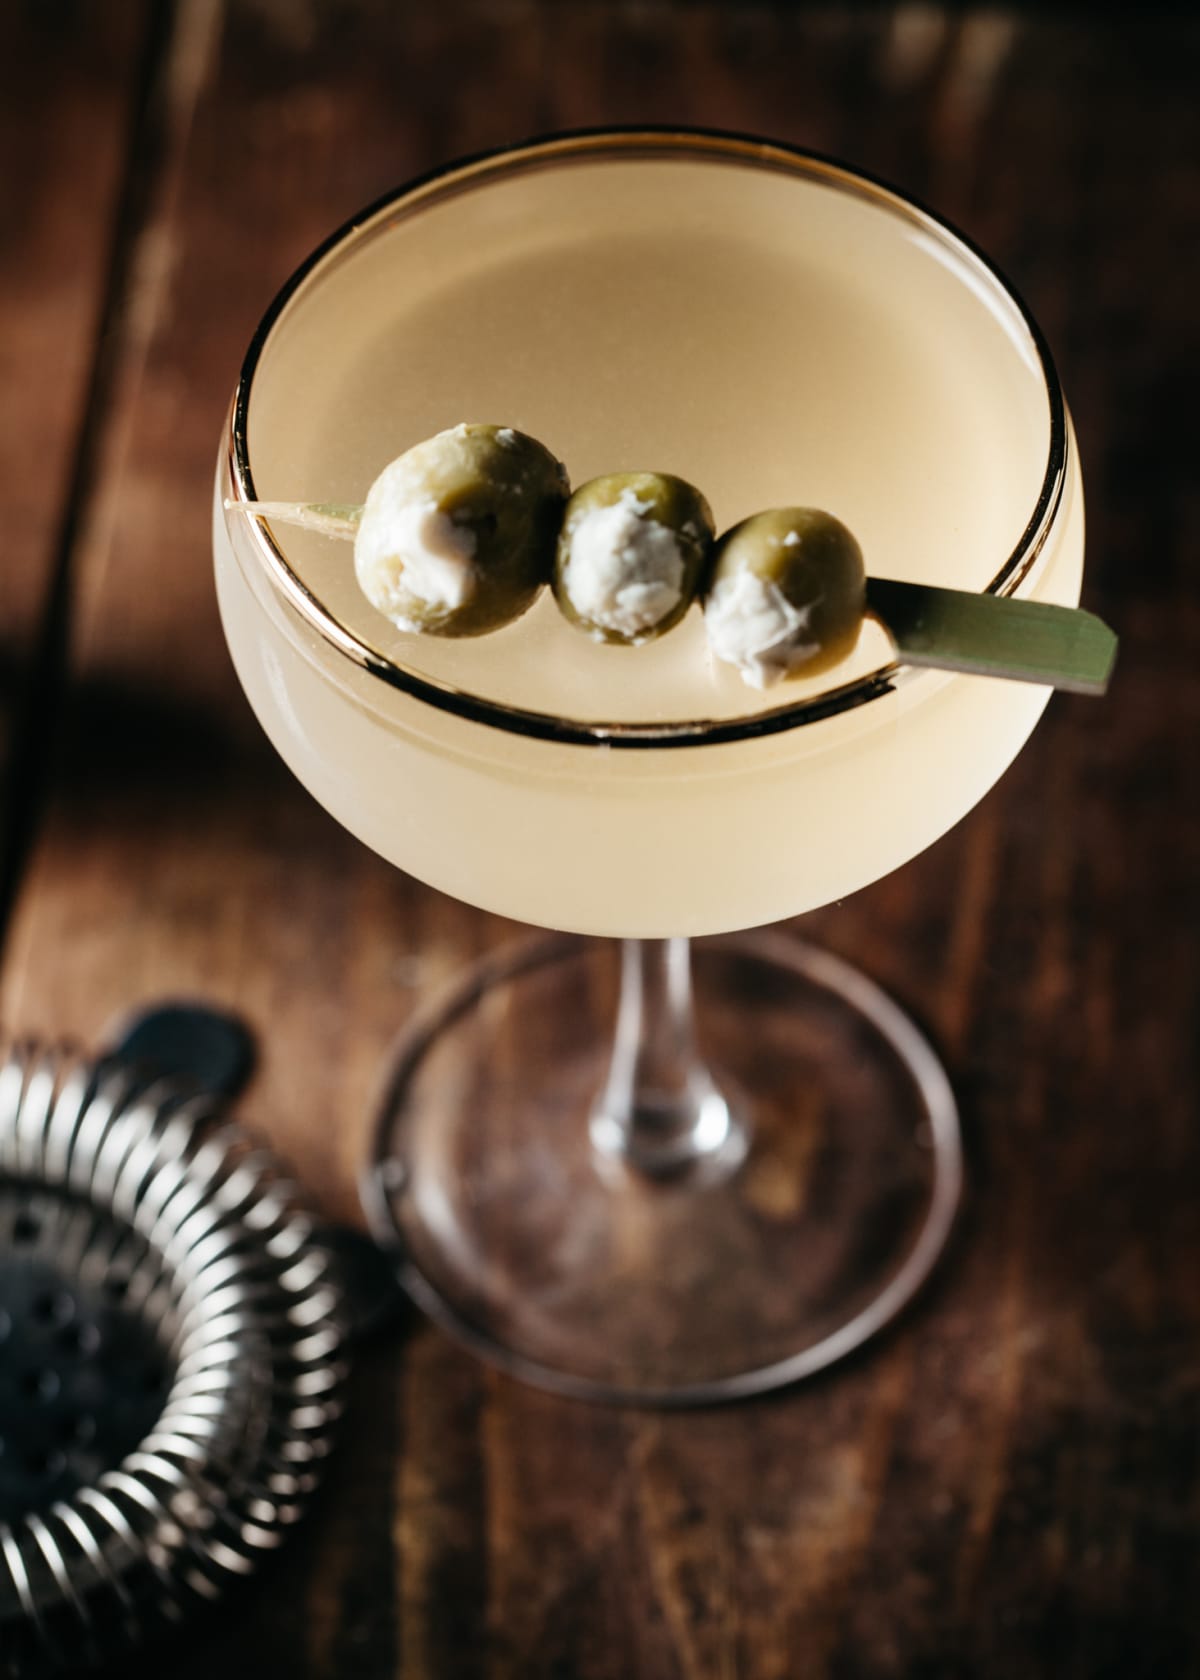 A martini garnished with stuffed olives on wooden surface, vertical